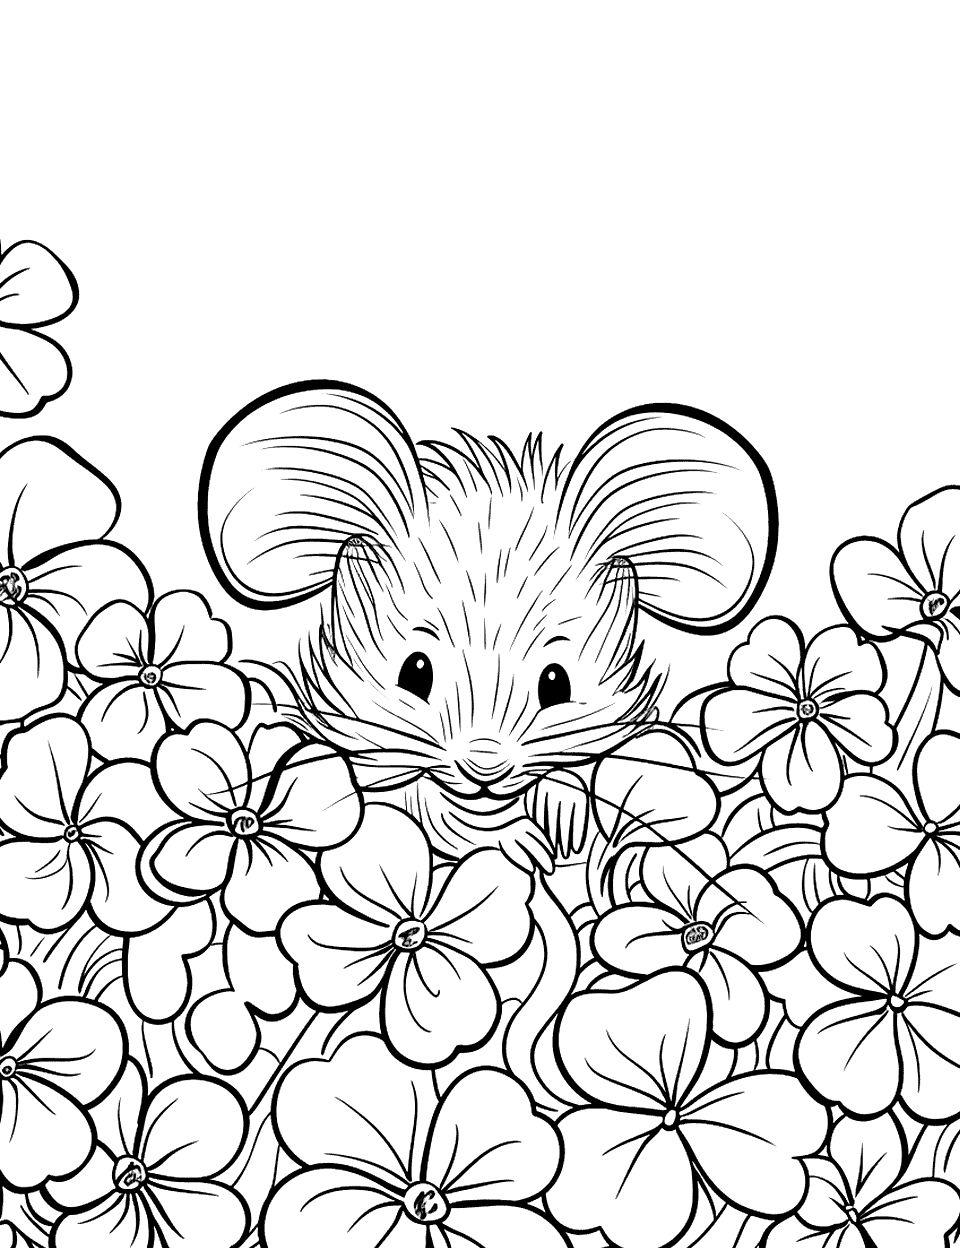 Mouse Peeking Out of a Shamrock Patch Coloring Page - A tiny mouse peeking out from a lush patch of shamrocks.